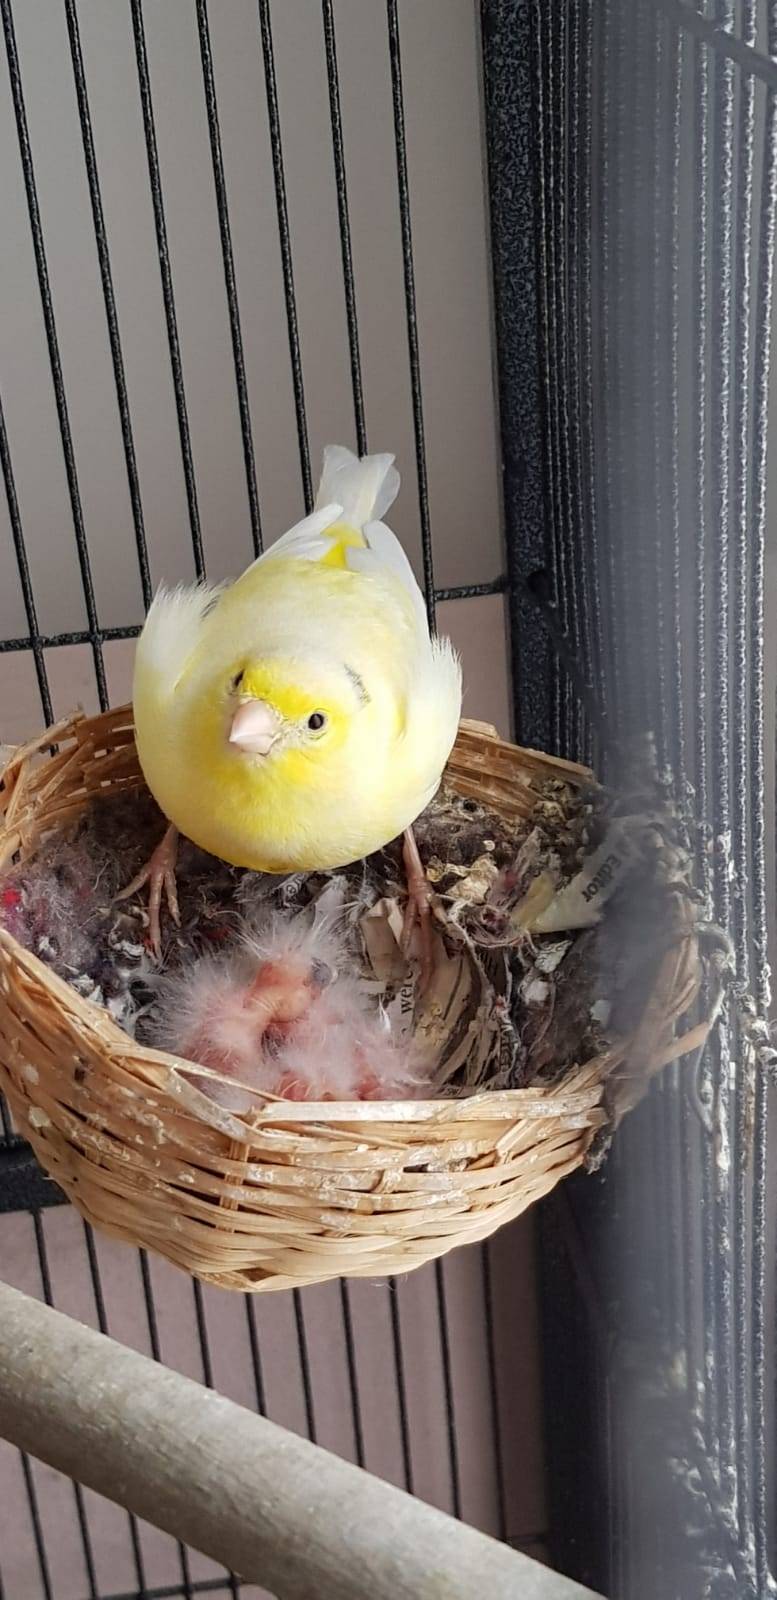 It is my cakeday, but I don't own a cat, or any pet, for that matter, so here is a pic of my sister's canary and new chicks�